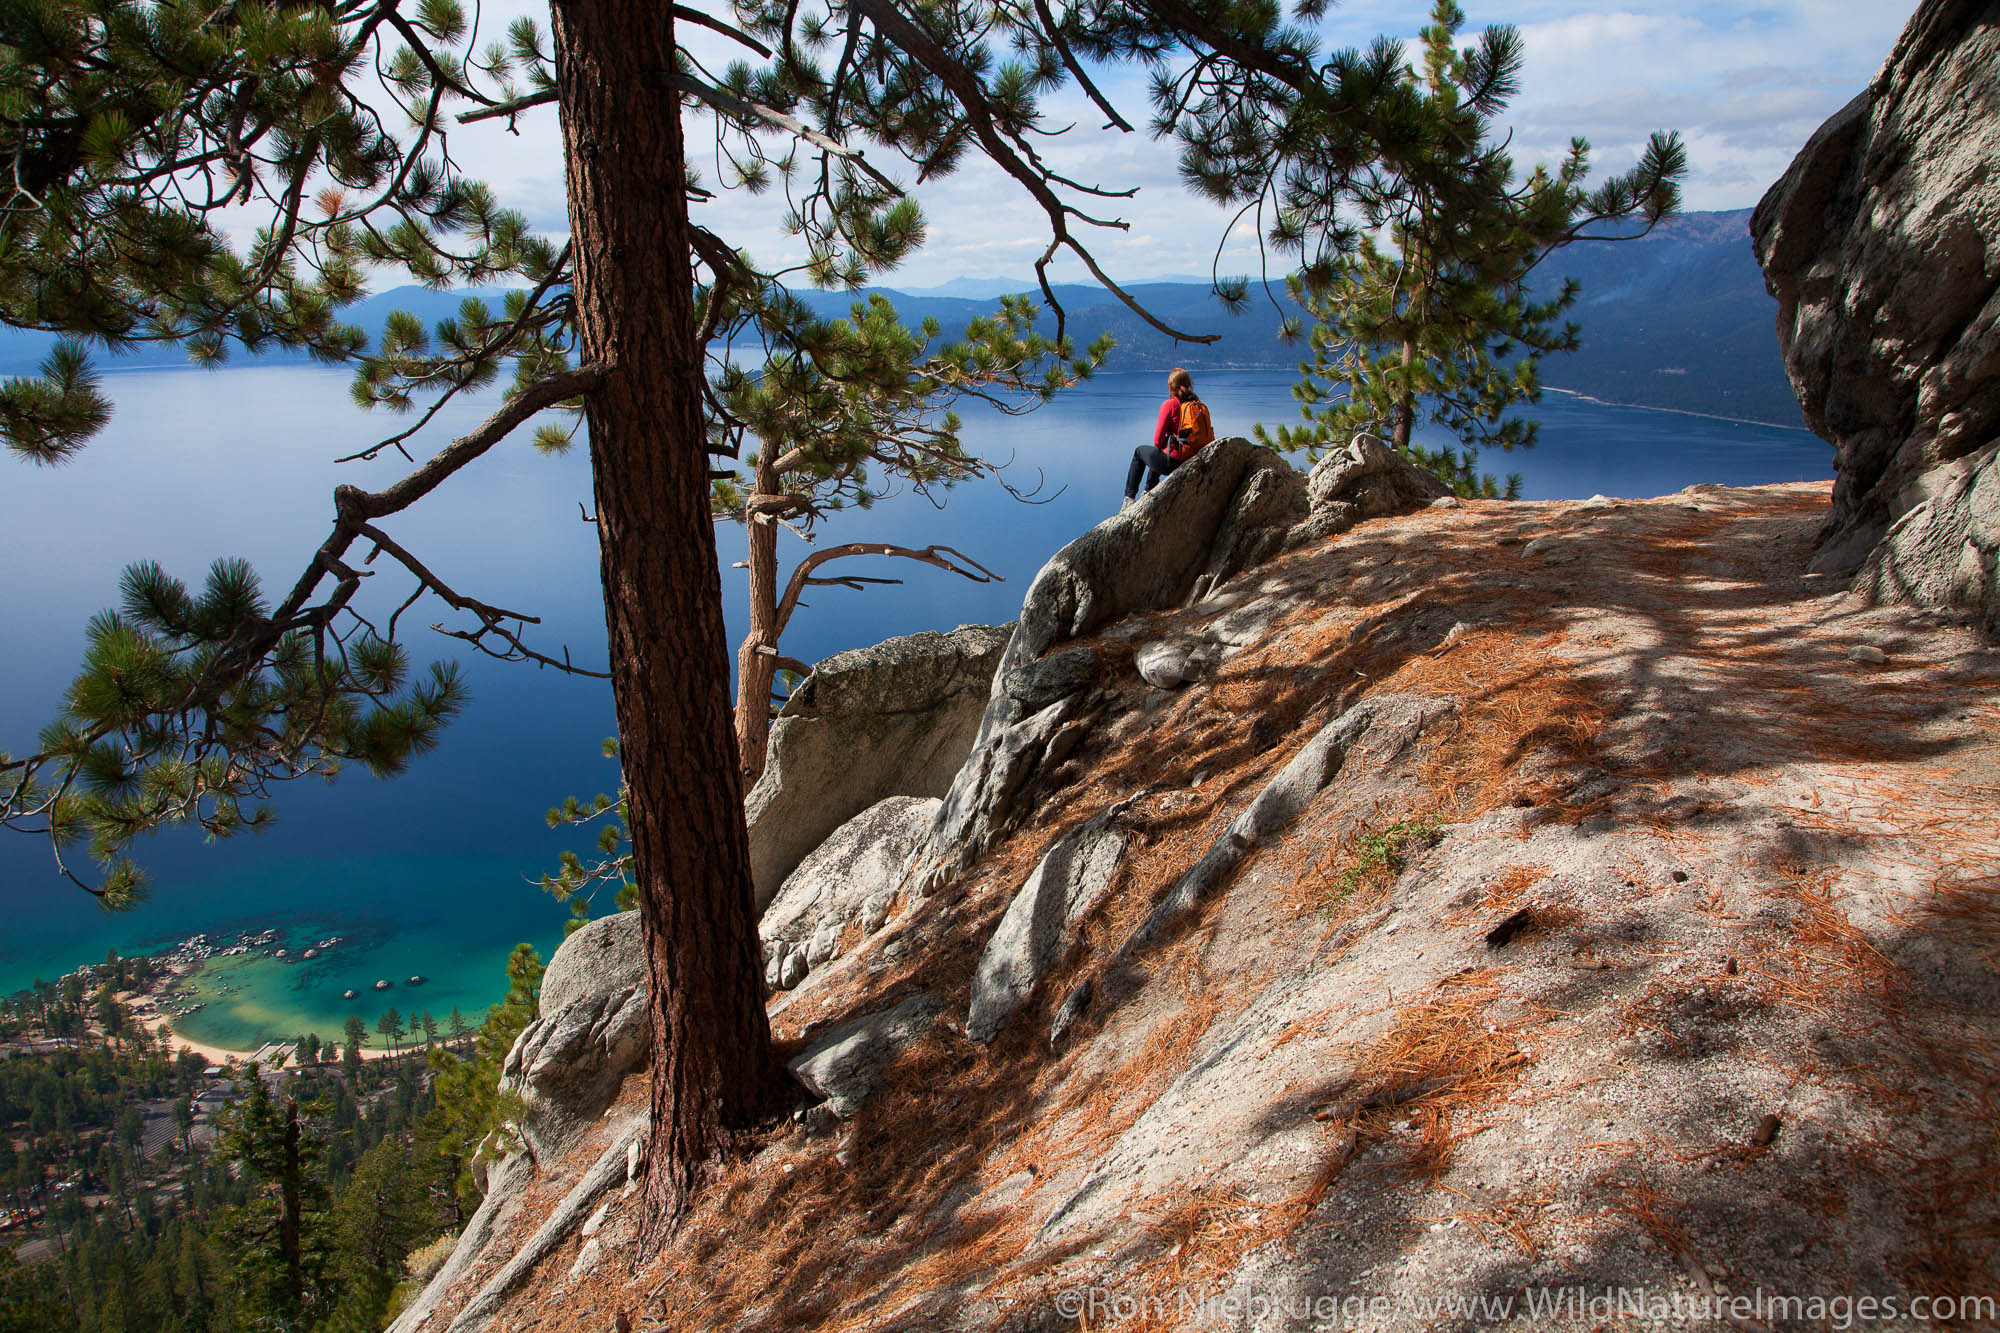 A hiker enjoys the view along the Flume Trail, Lake Tahoe, NV (model released)